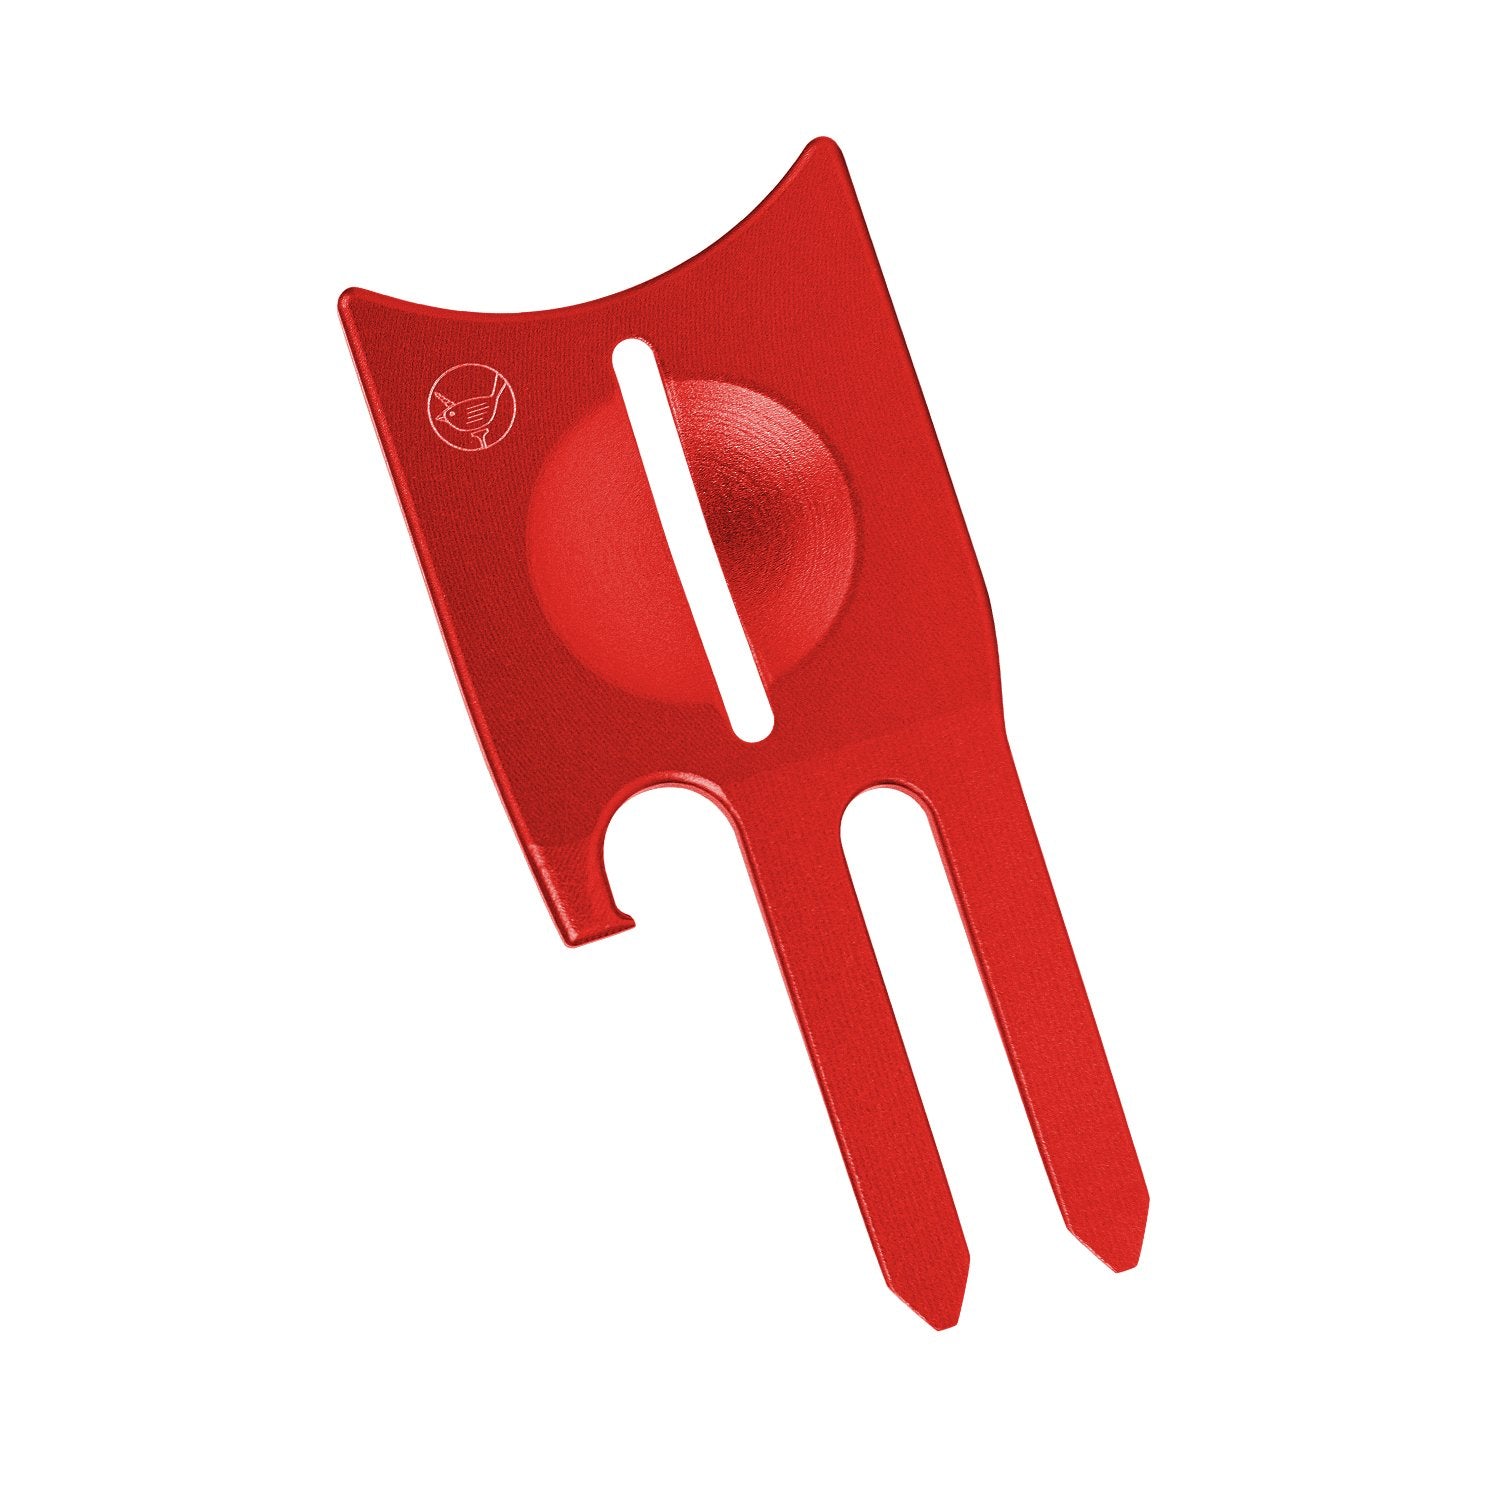 Editor's picks: A handy divot tool with 6 practical uses